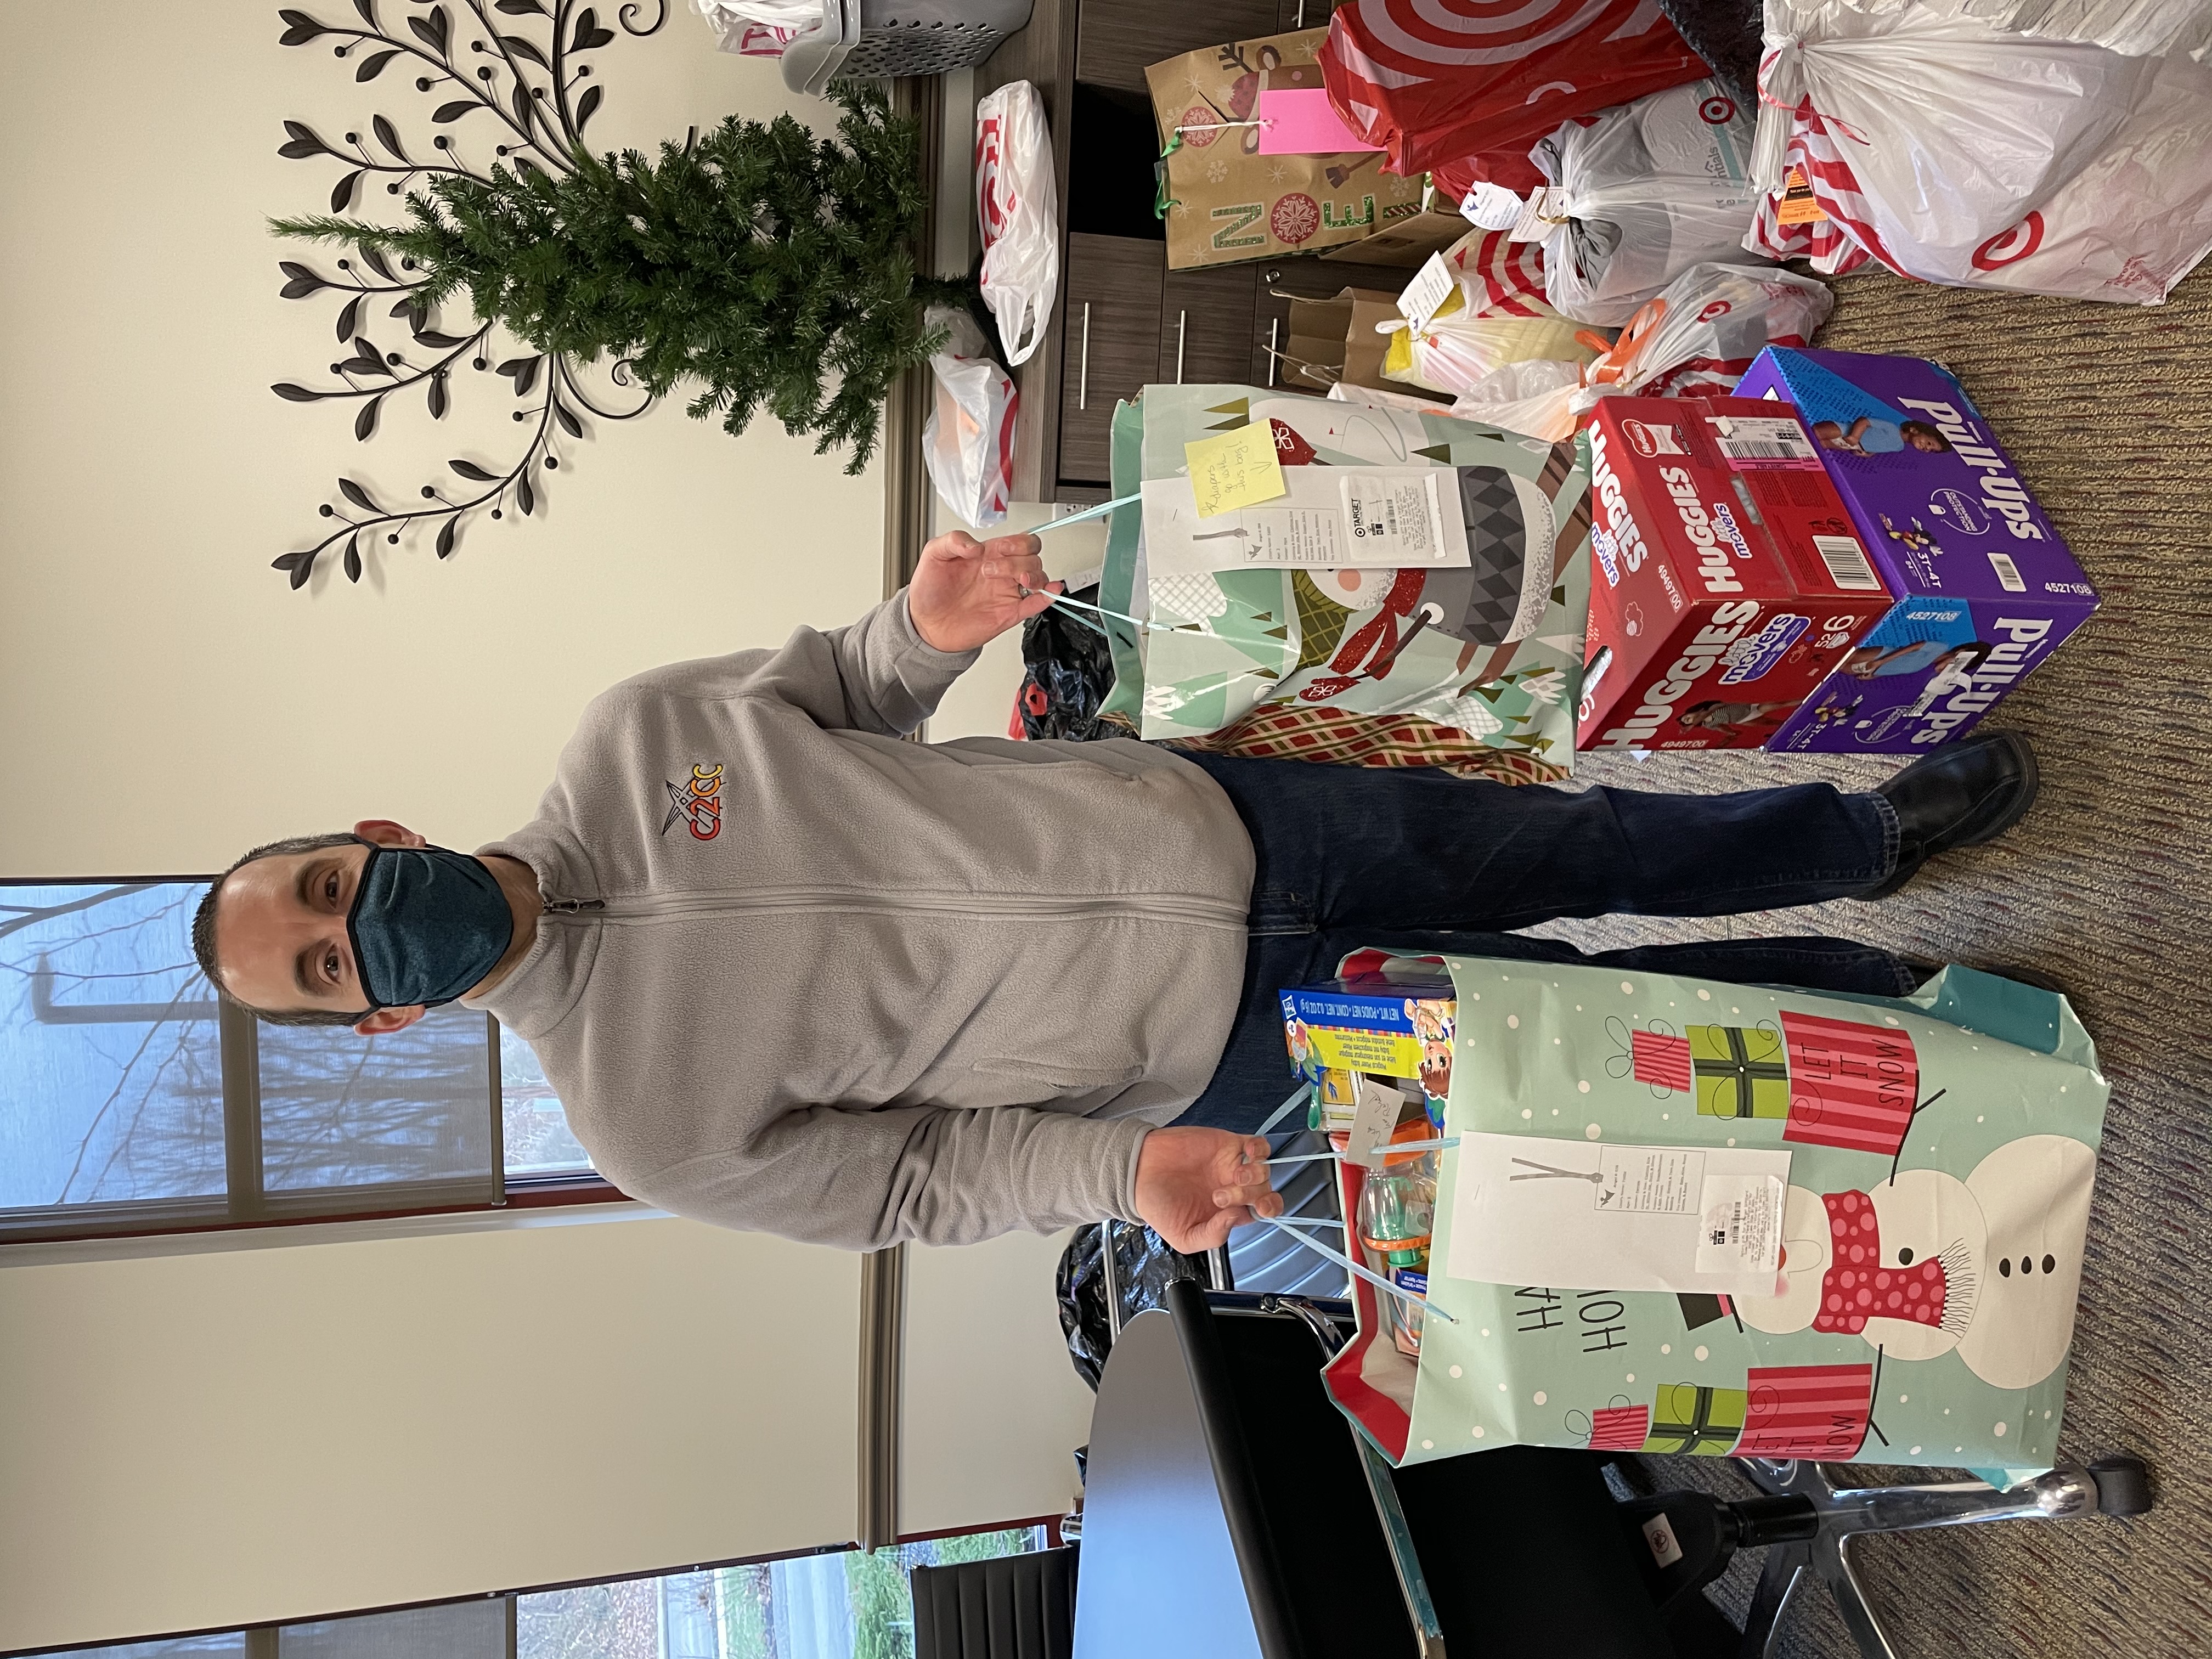 Jason Vallozzi, owner of Campus and Career Crossroads, is a fabulous community partner that participated in our Angel Tree Project 